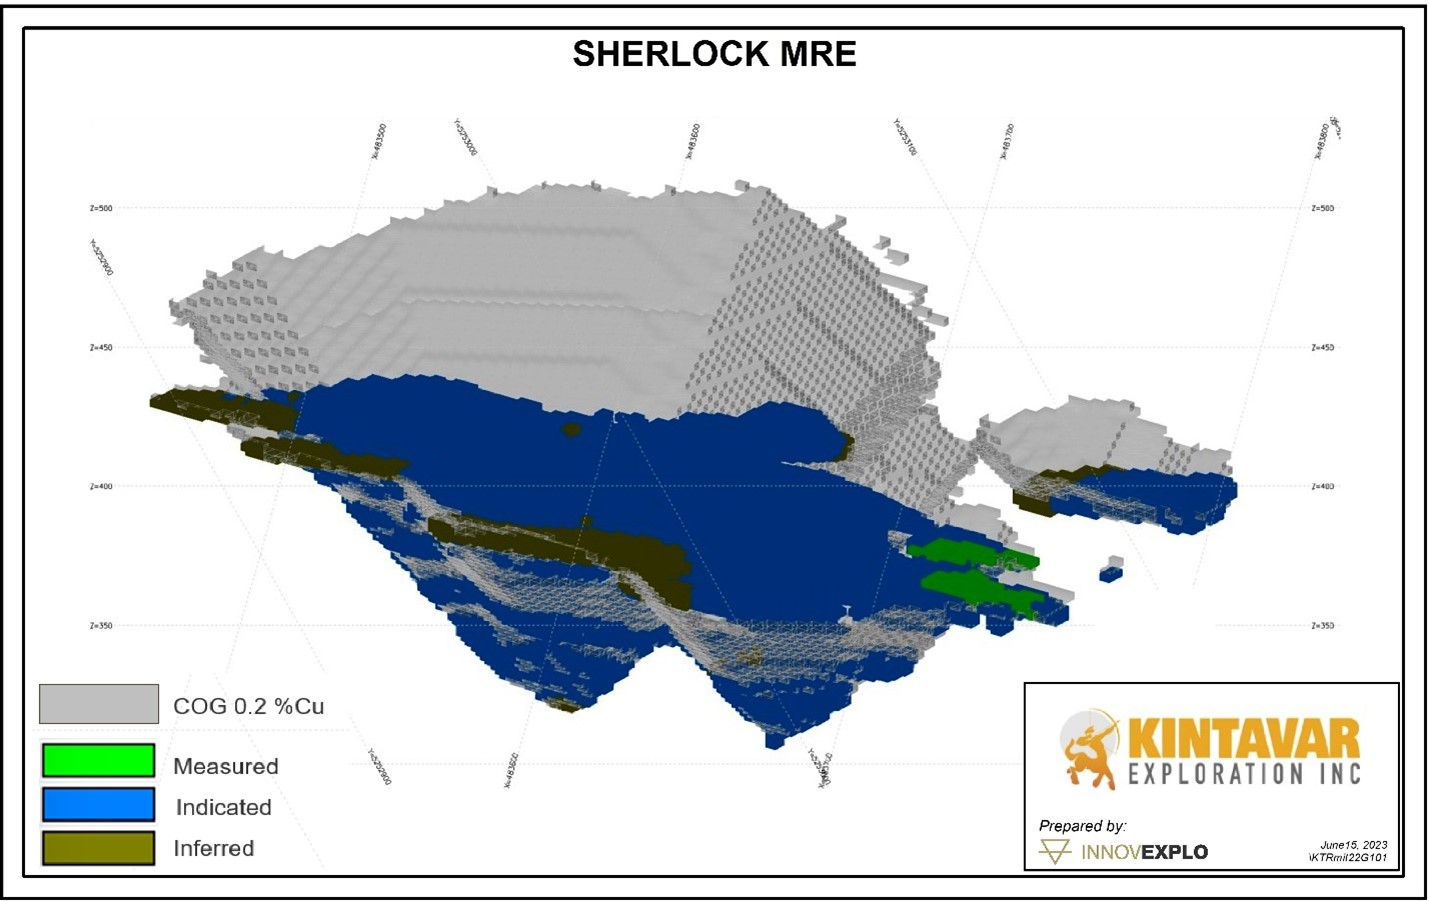 Sherlock Zone resource categories within a pit boundary at a cut-off grade of 0.2% Cu.